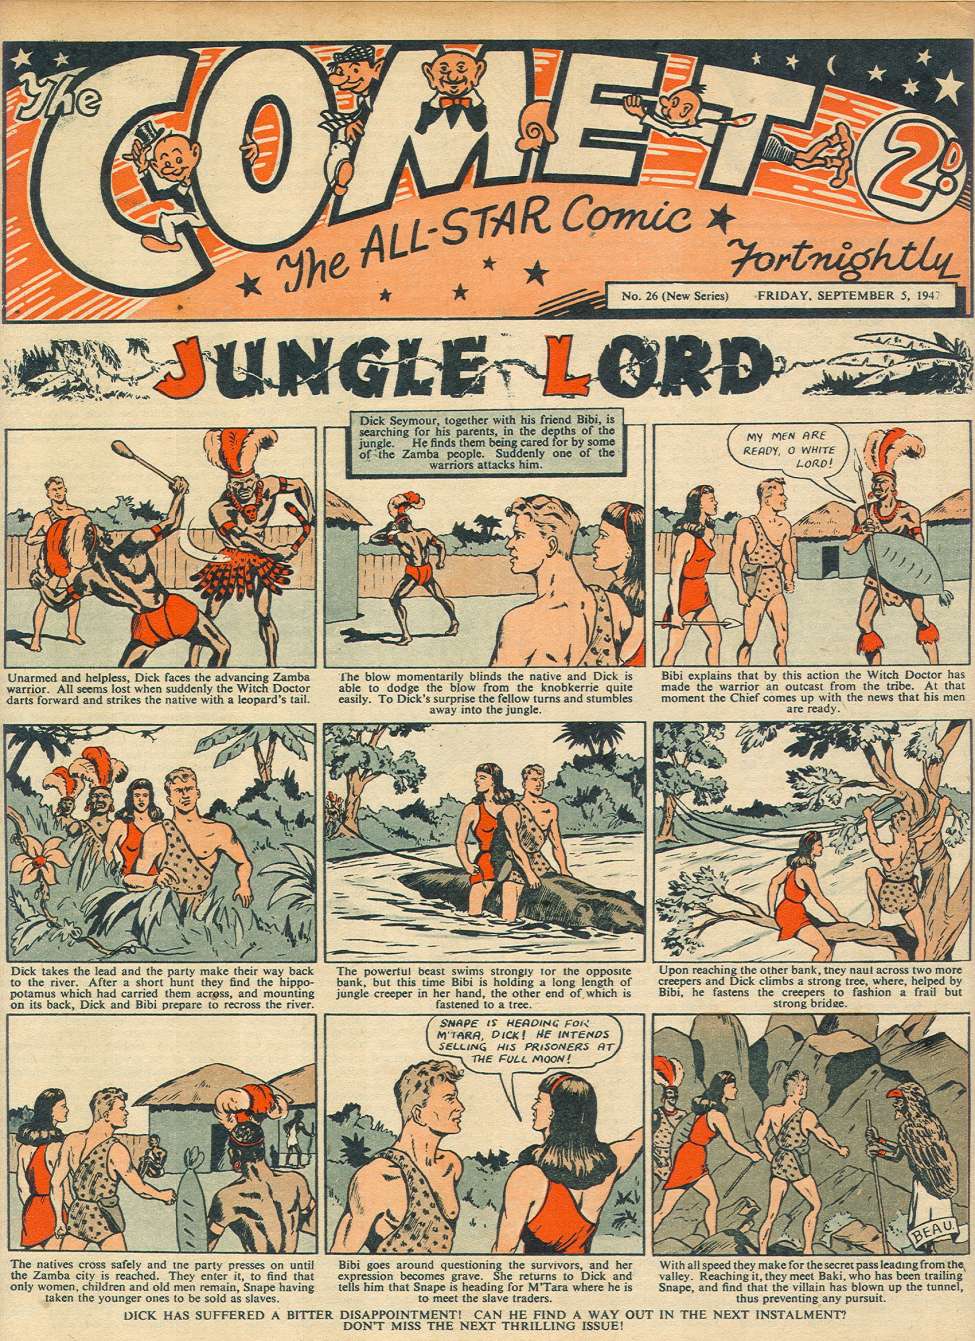 Comic Book Cover For The Comet 26